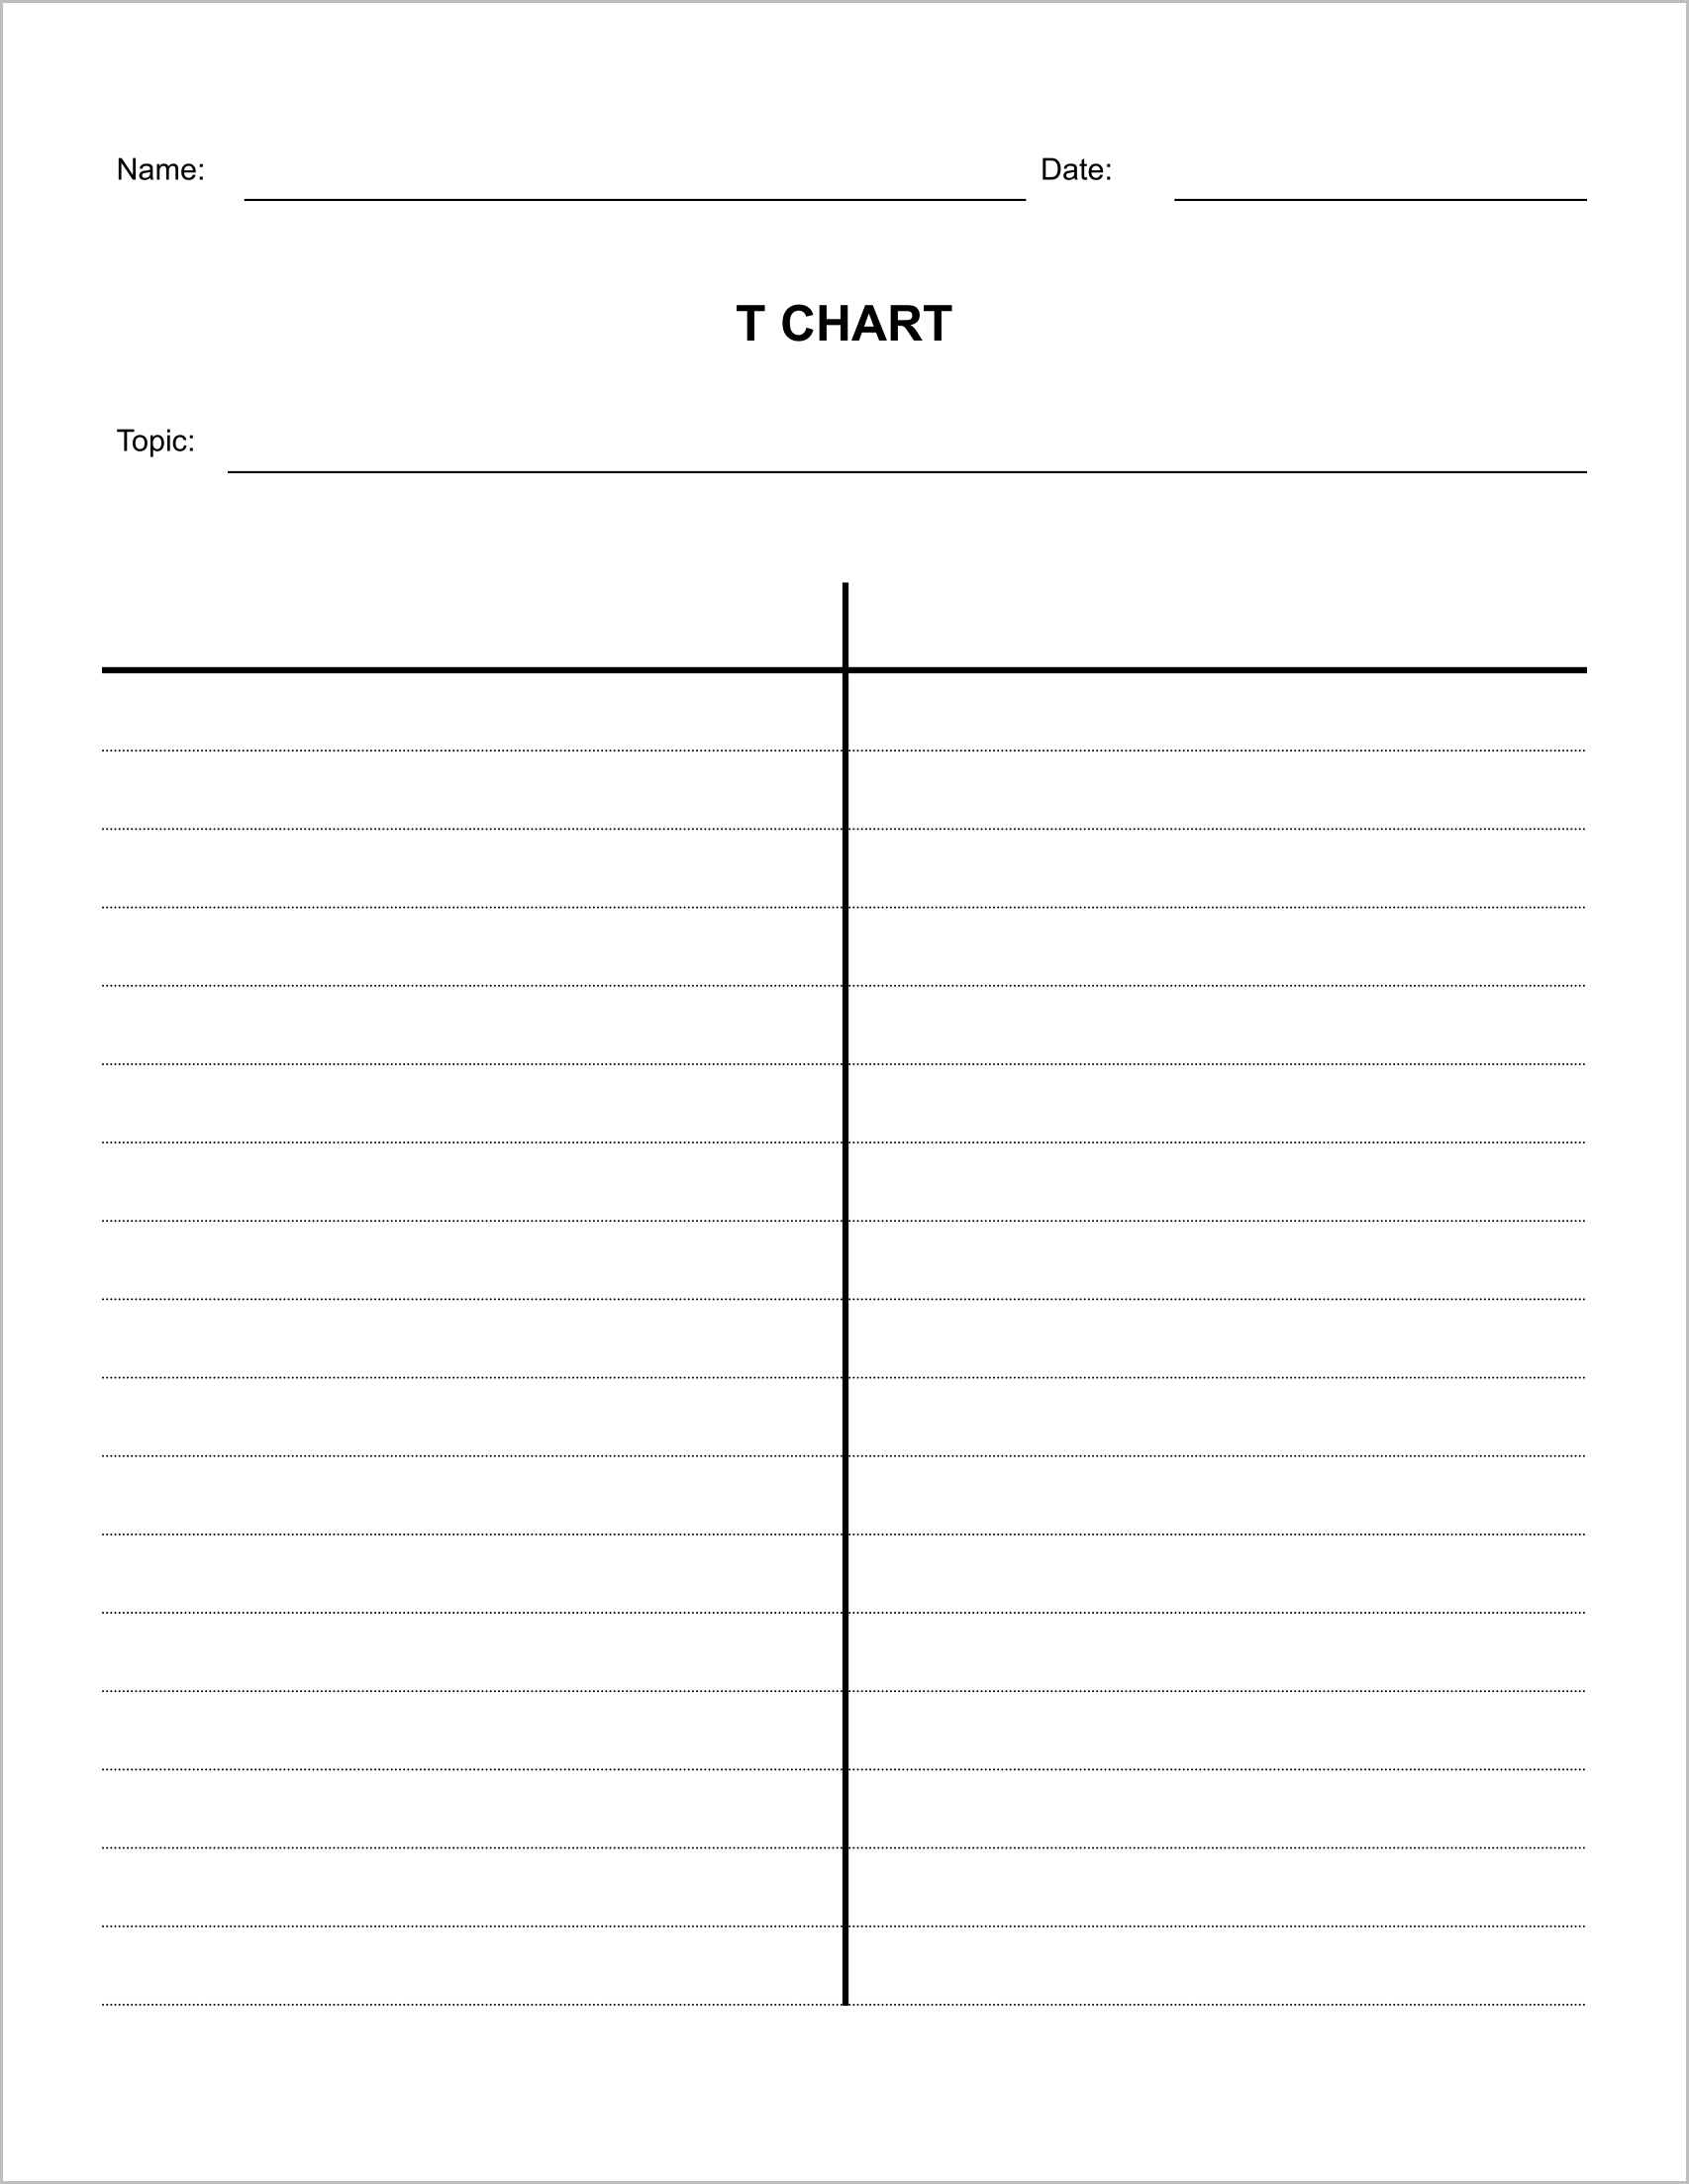 Free T-Chart Templates for Google Docs